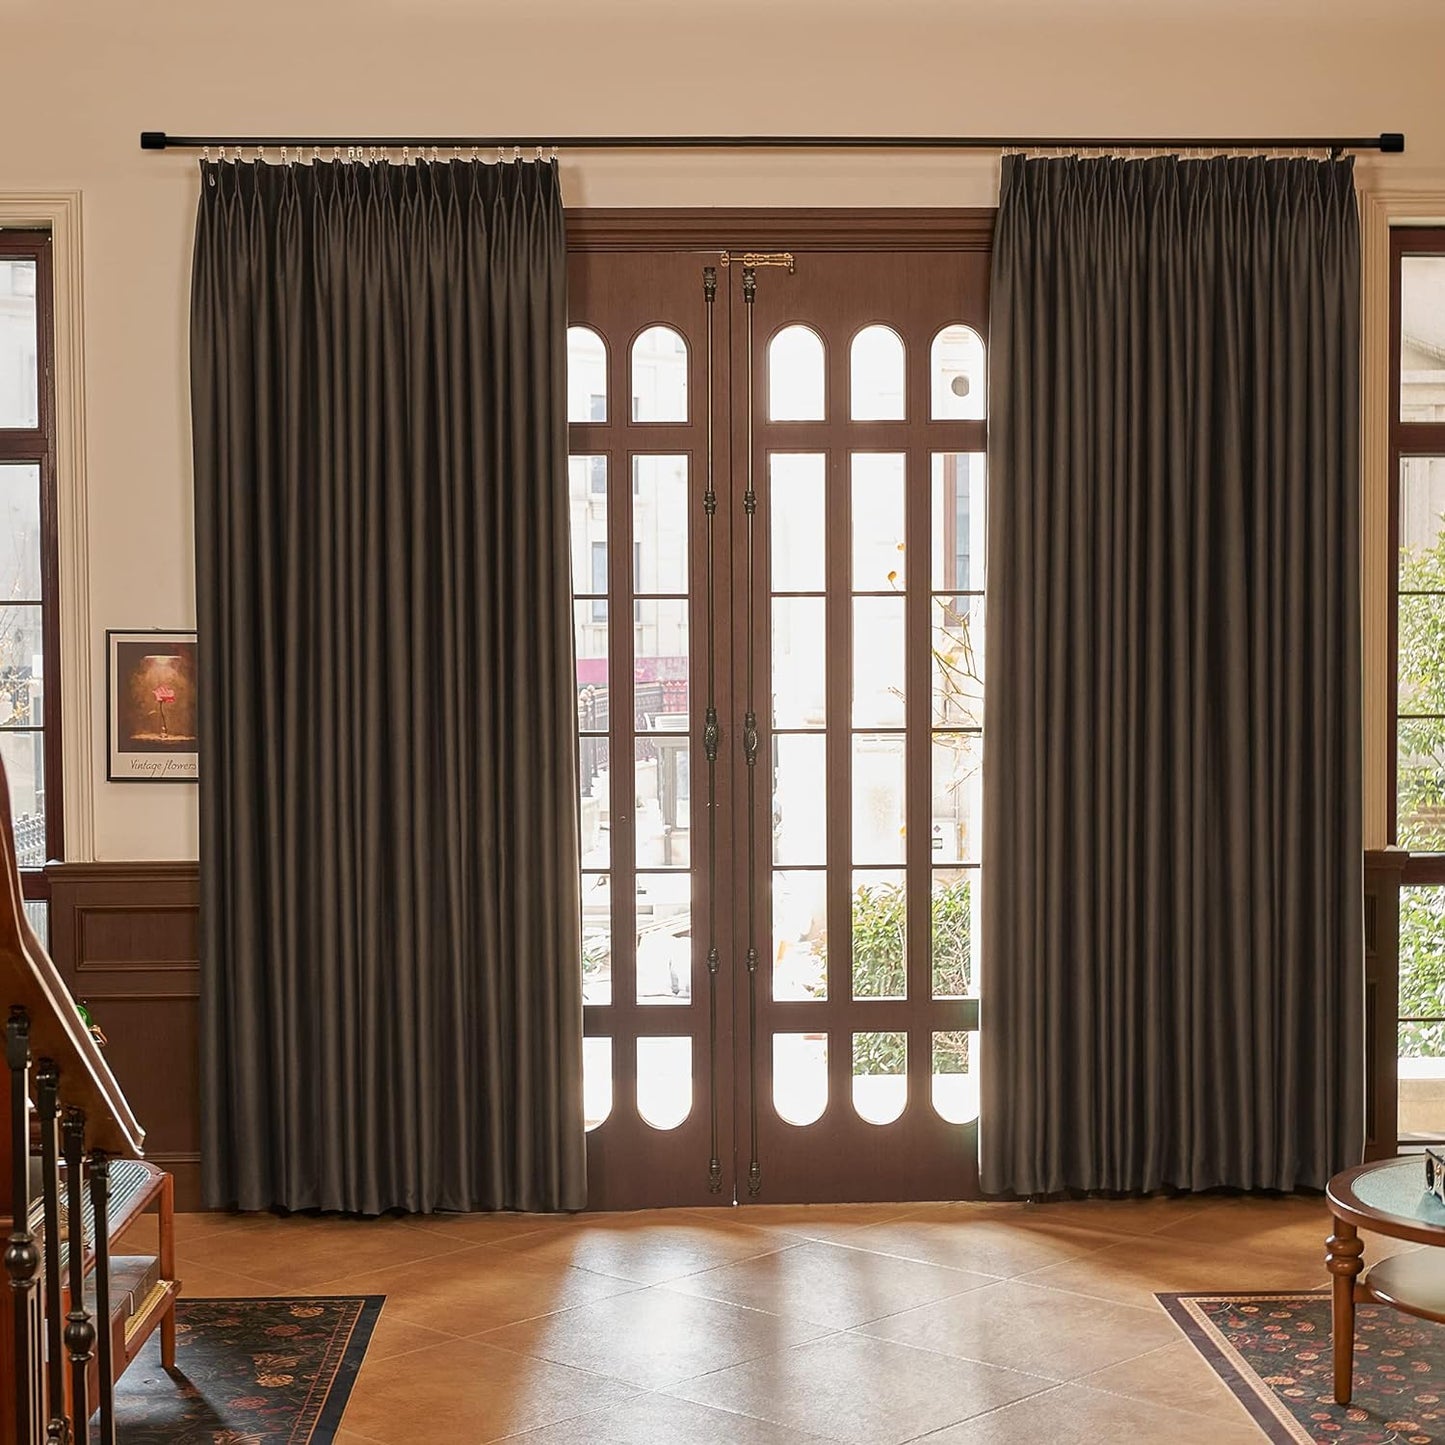 HUTO Beige Pinch Pleated Curtains Thermal Insulated Room Darkening Window Treatment Panel for Living Room, Bedroom, Kitchen, Small Window, 52 by 63 Inches Long, 1 Panel  HUTO Brown 72"W X 96"L 